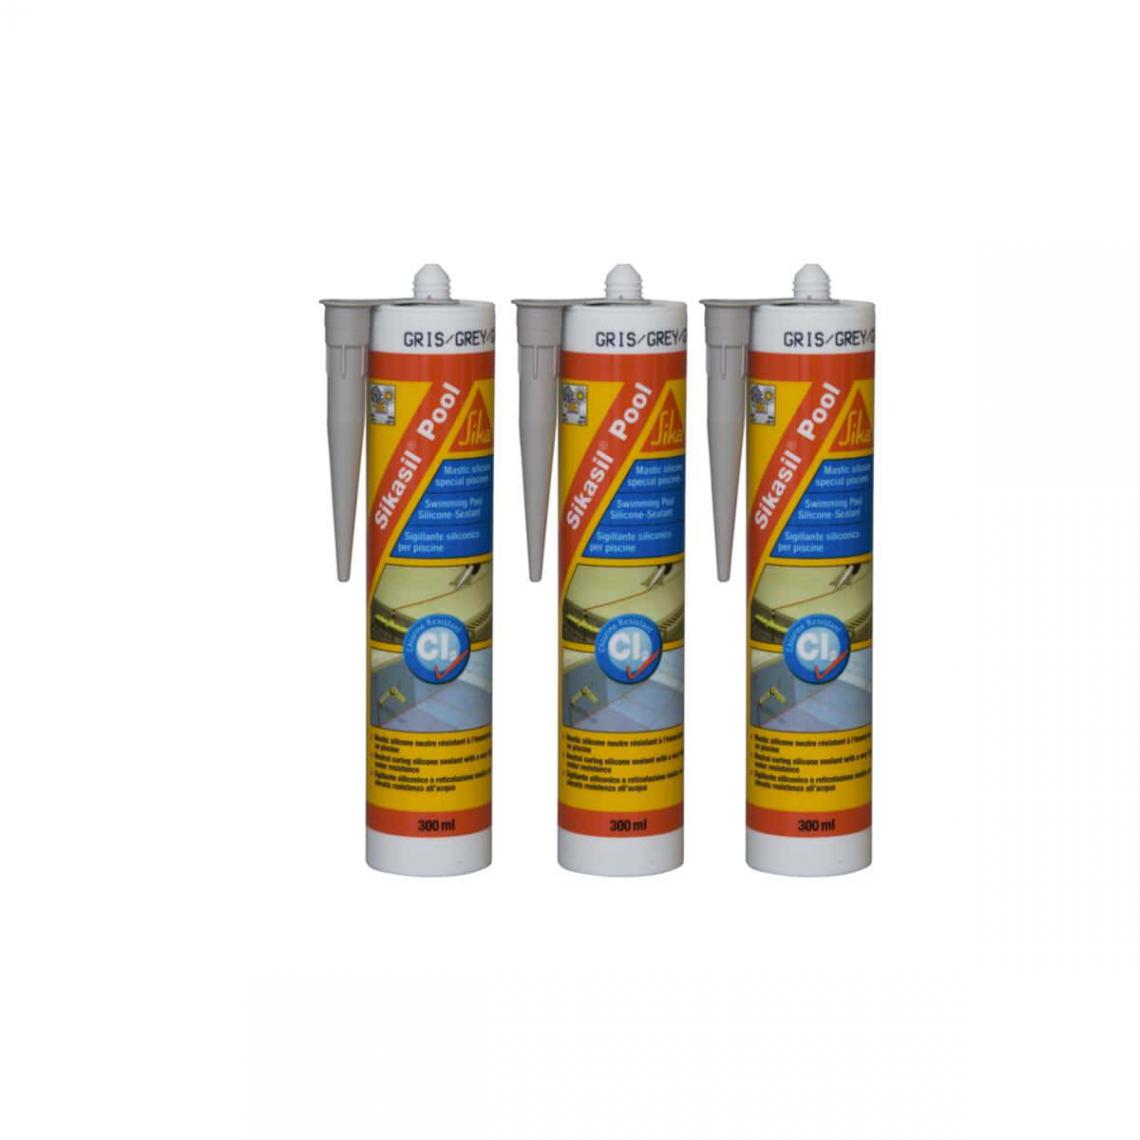 Sika - Lot de 3 mastic silicone SIKA Sikasil Pool - Joint pour piscine gris - 300ml - Colle & adhésif